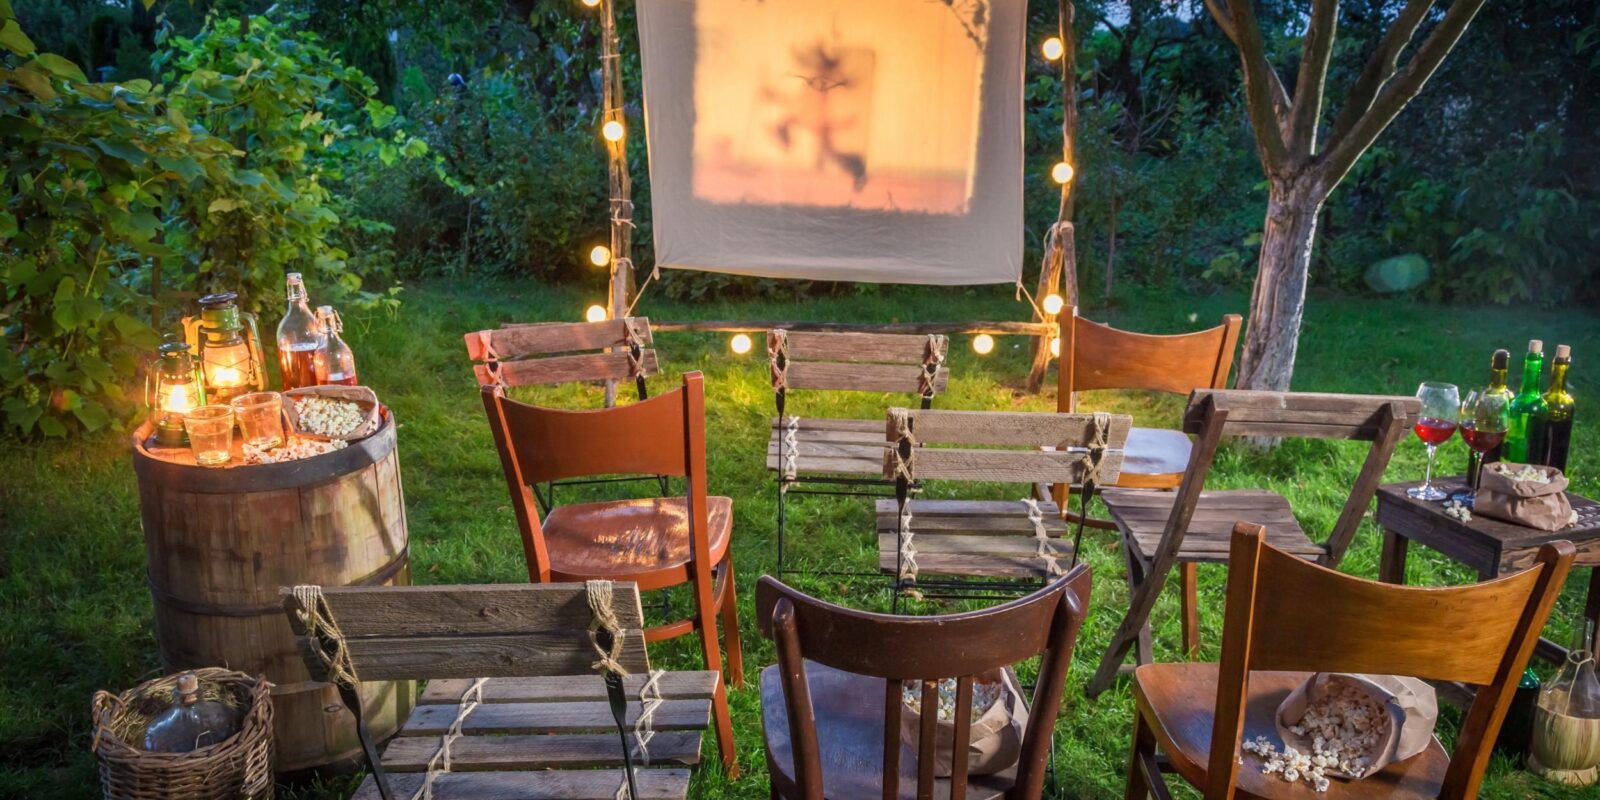 Setting Up a Cinema in the Garden